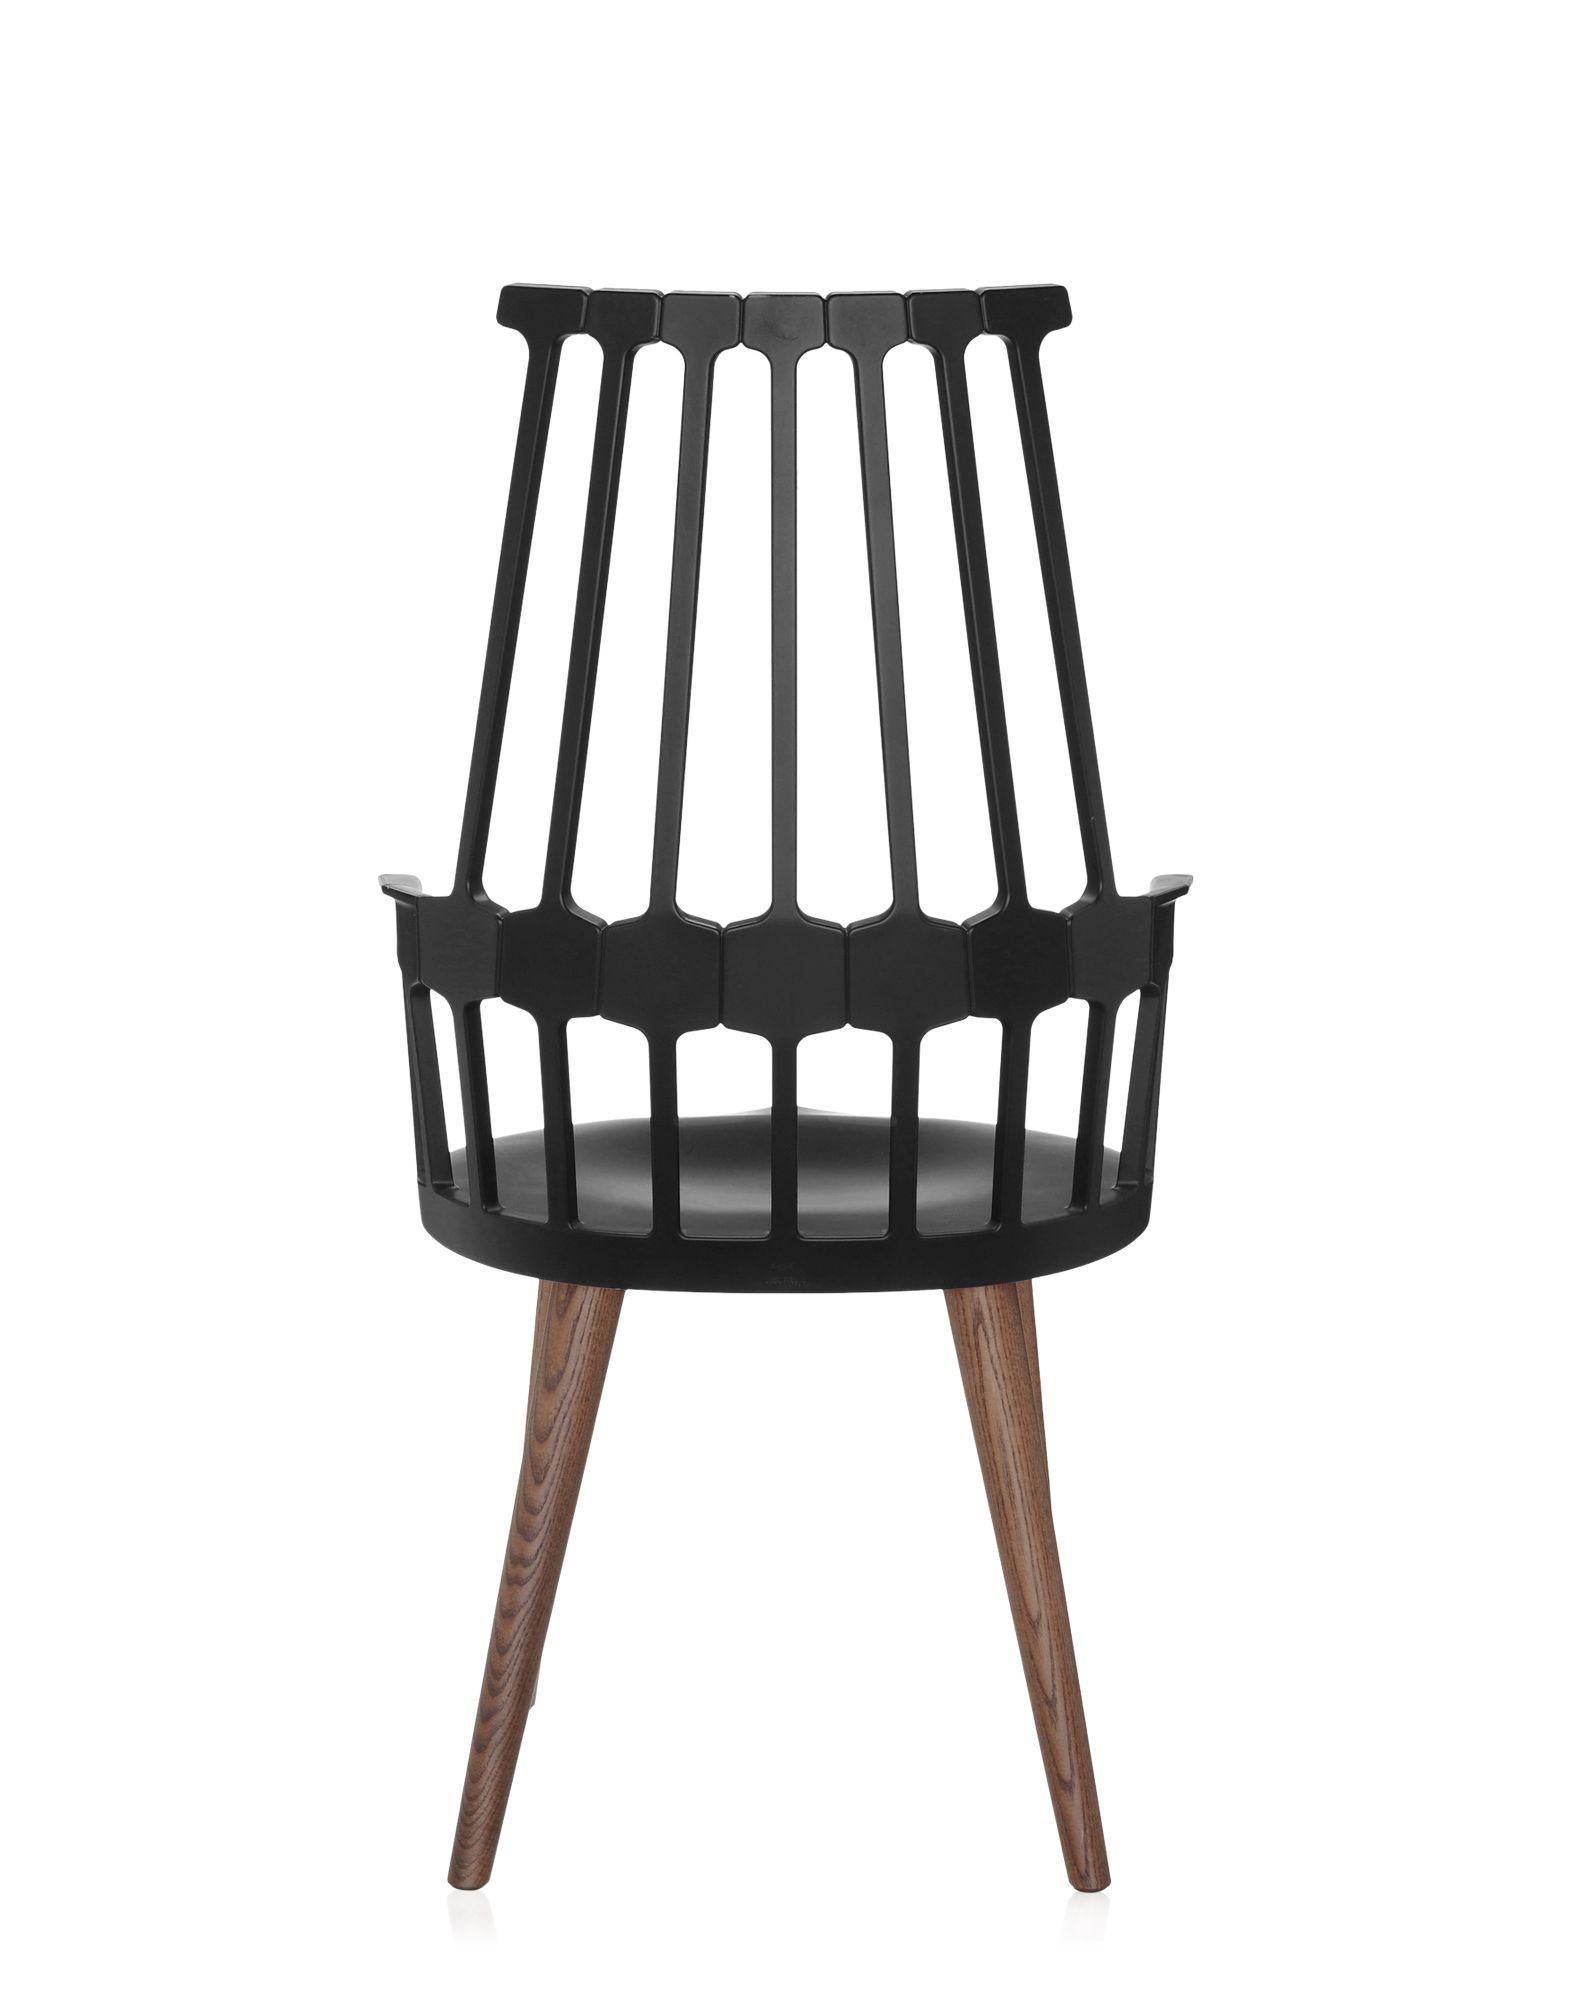 Italian Set of 2 Kartell Comback Chairs in Black with Oak Legs by Patricia Urquiola